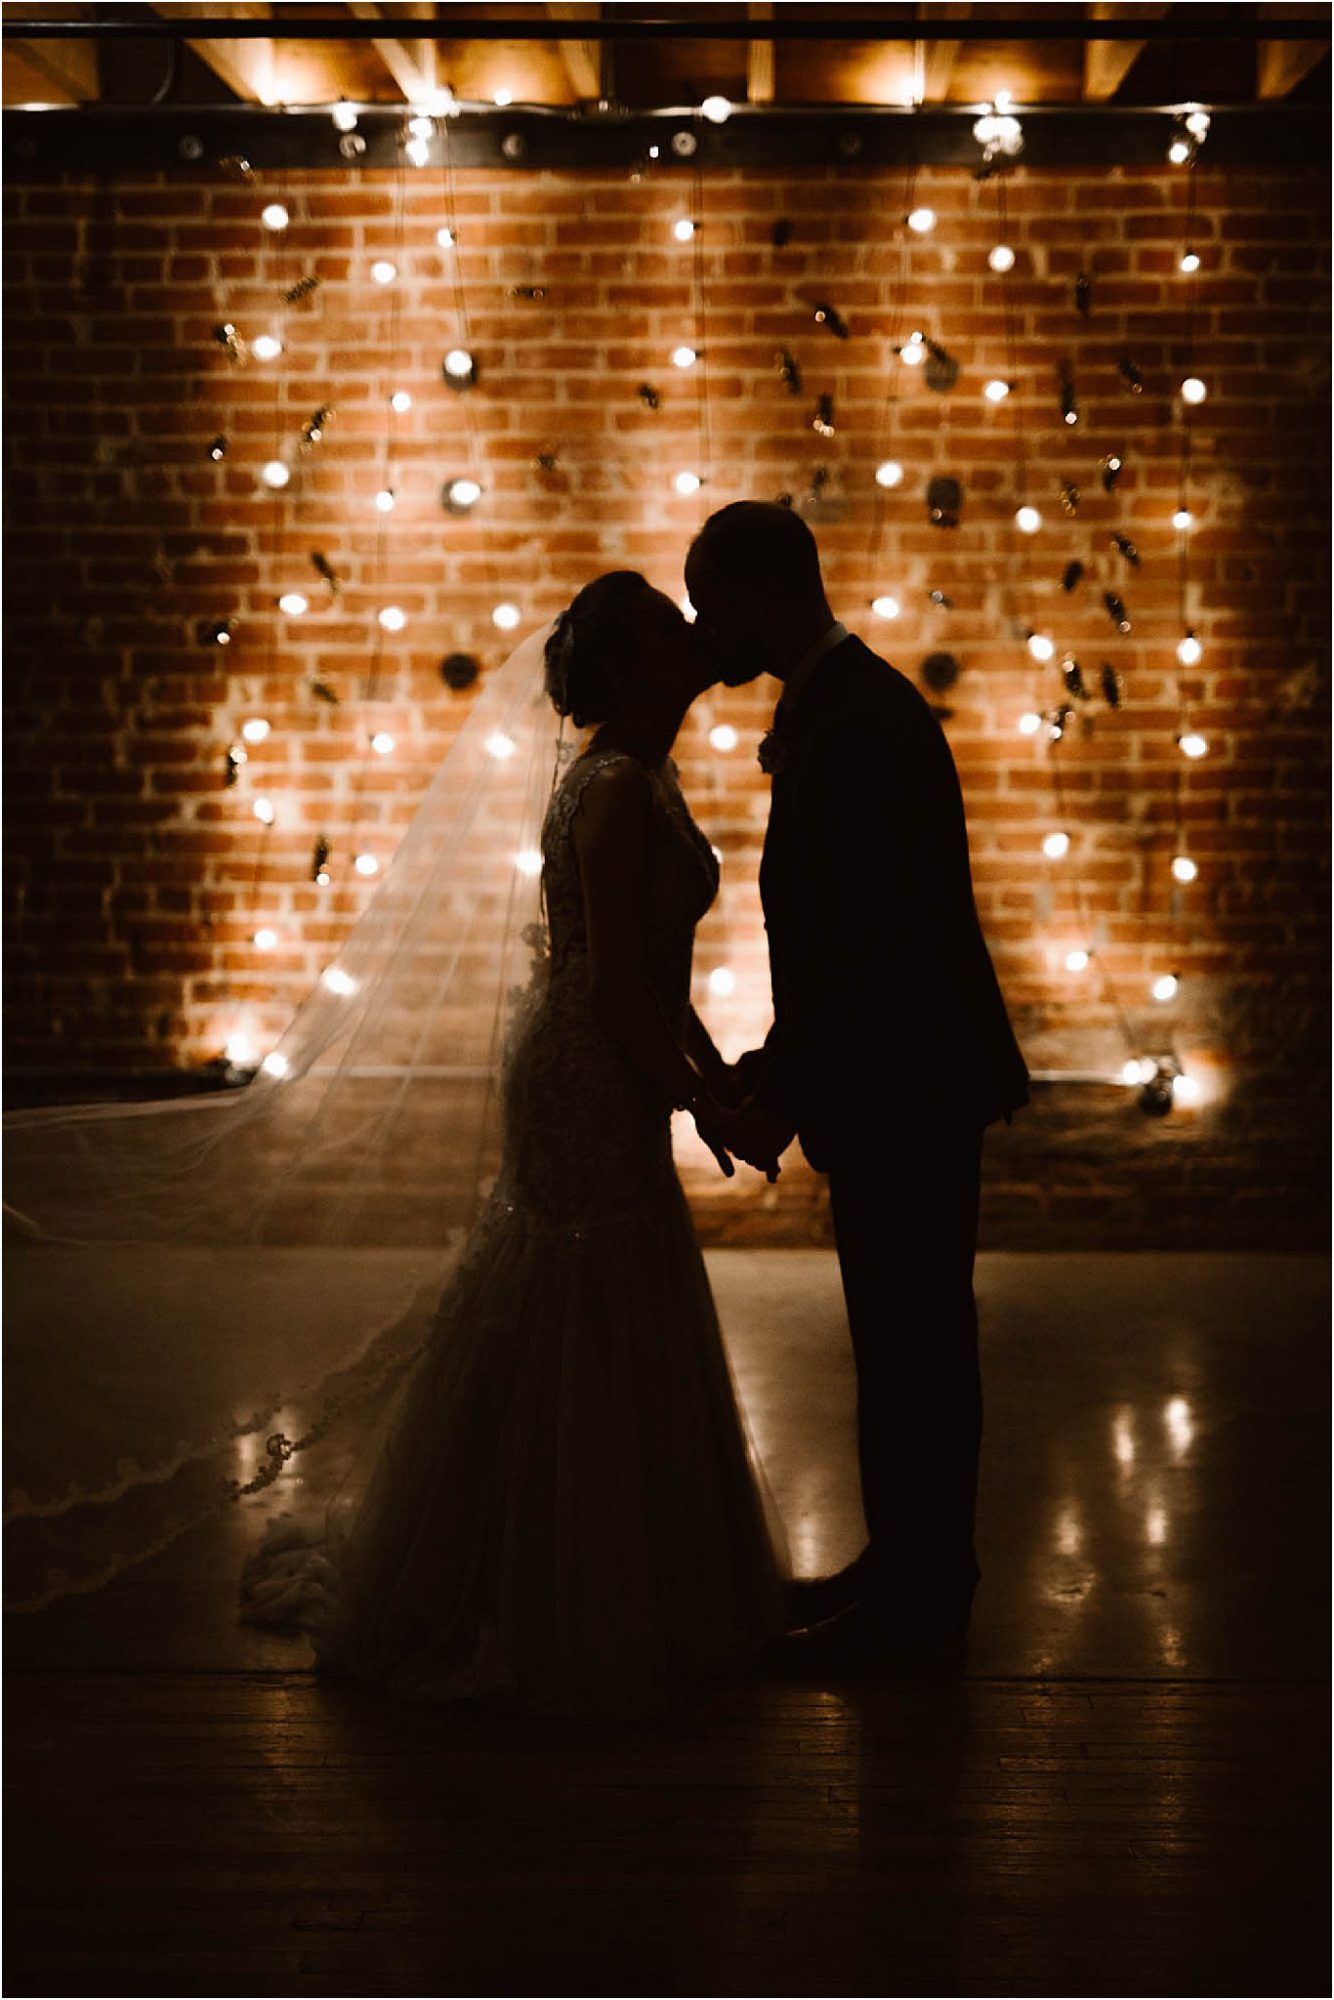 silhouette of bride and groom kissing in front of wall of lights